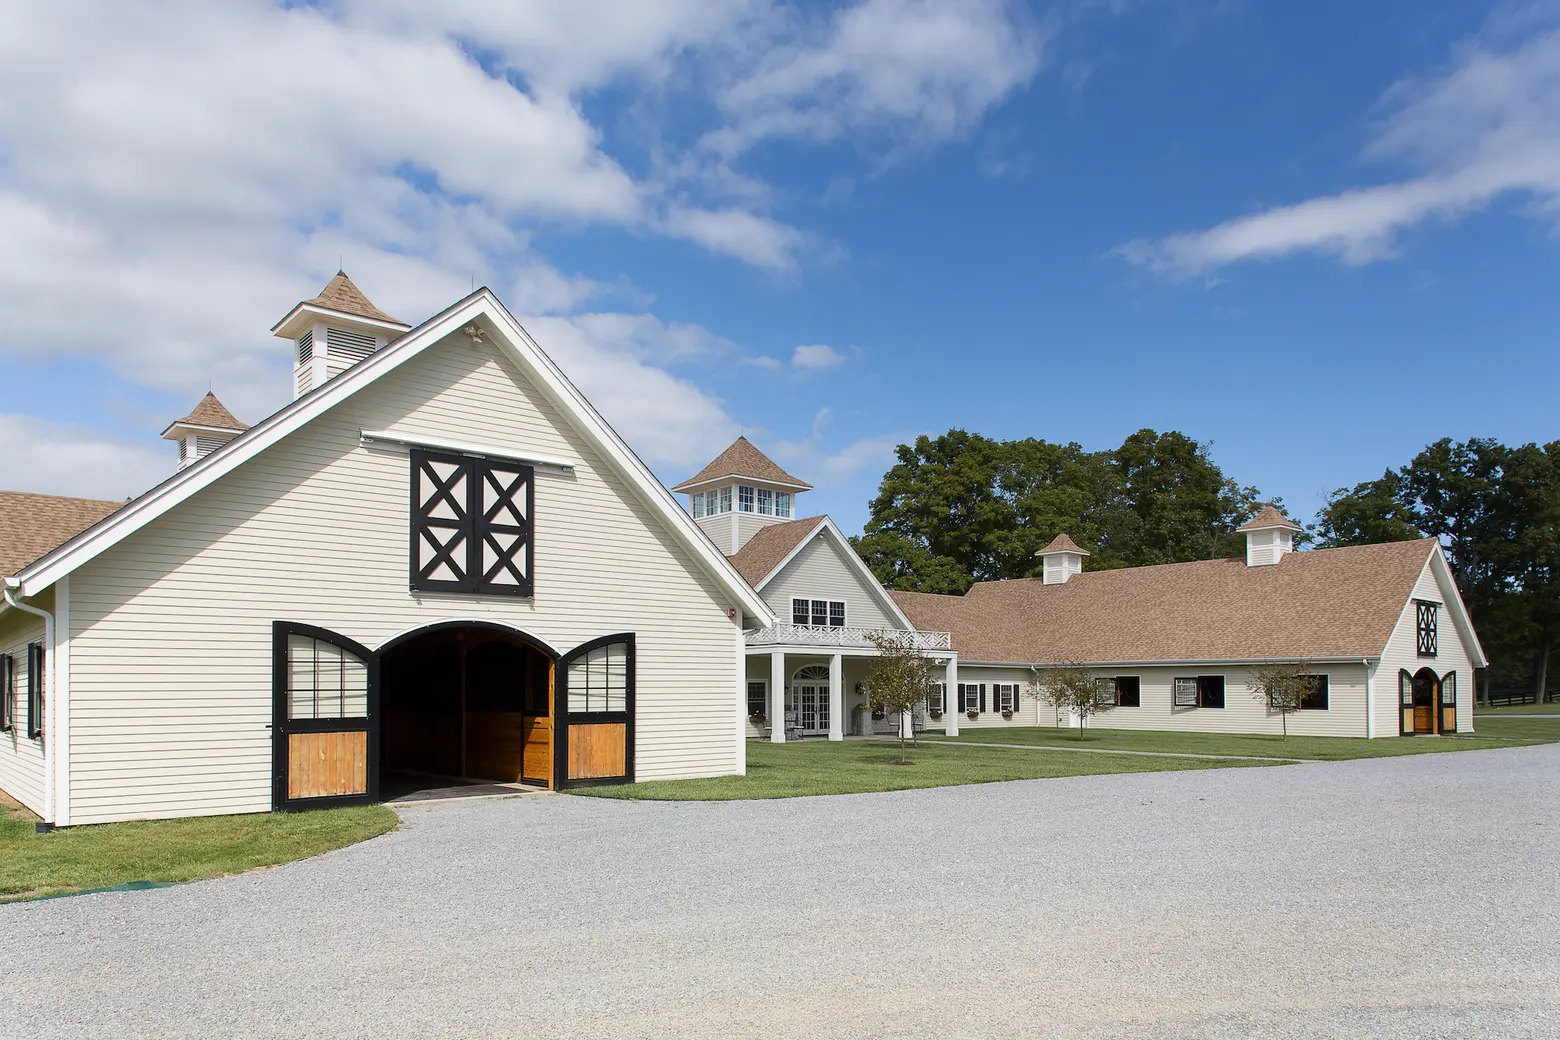 Mary Tyler Moore’s former upstate estate turned equestrian center asks $3.9M